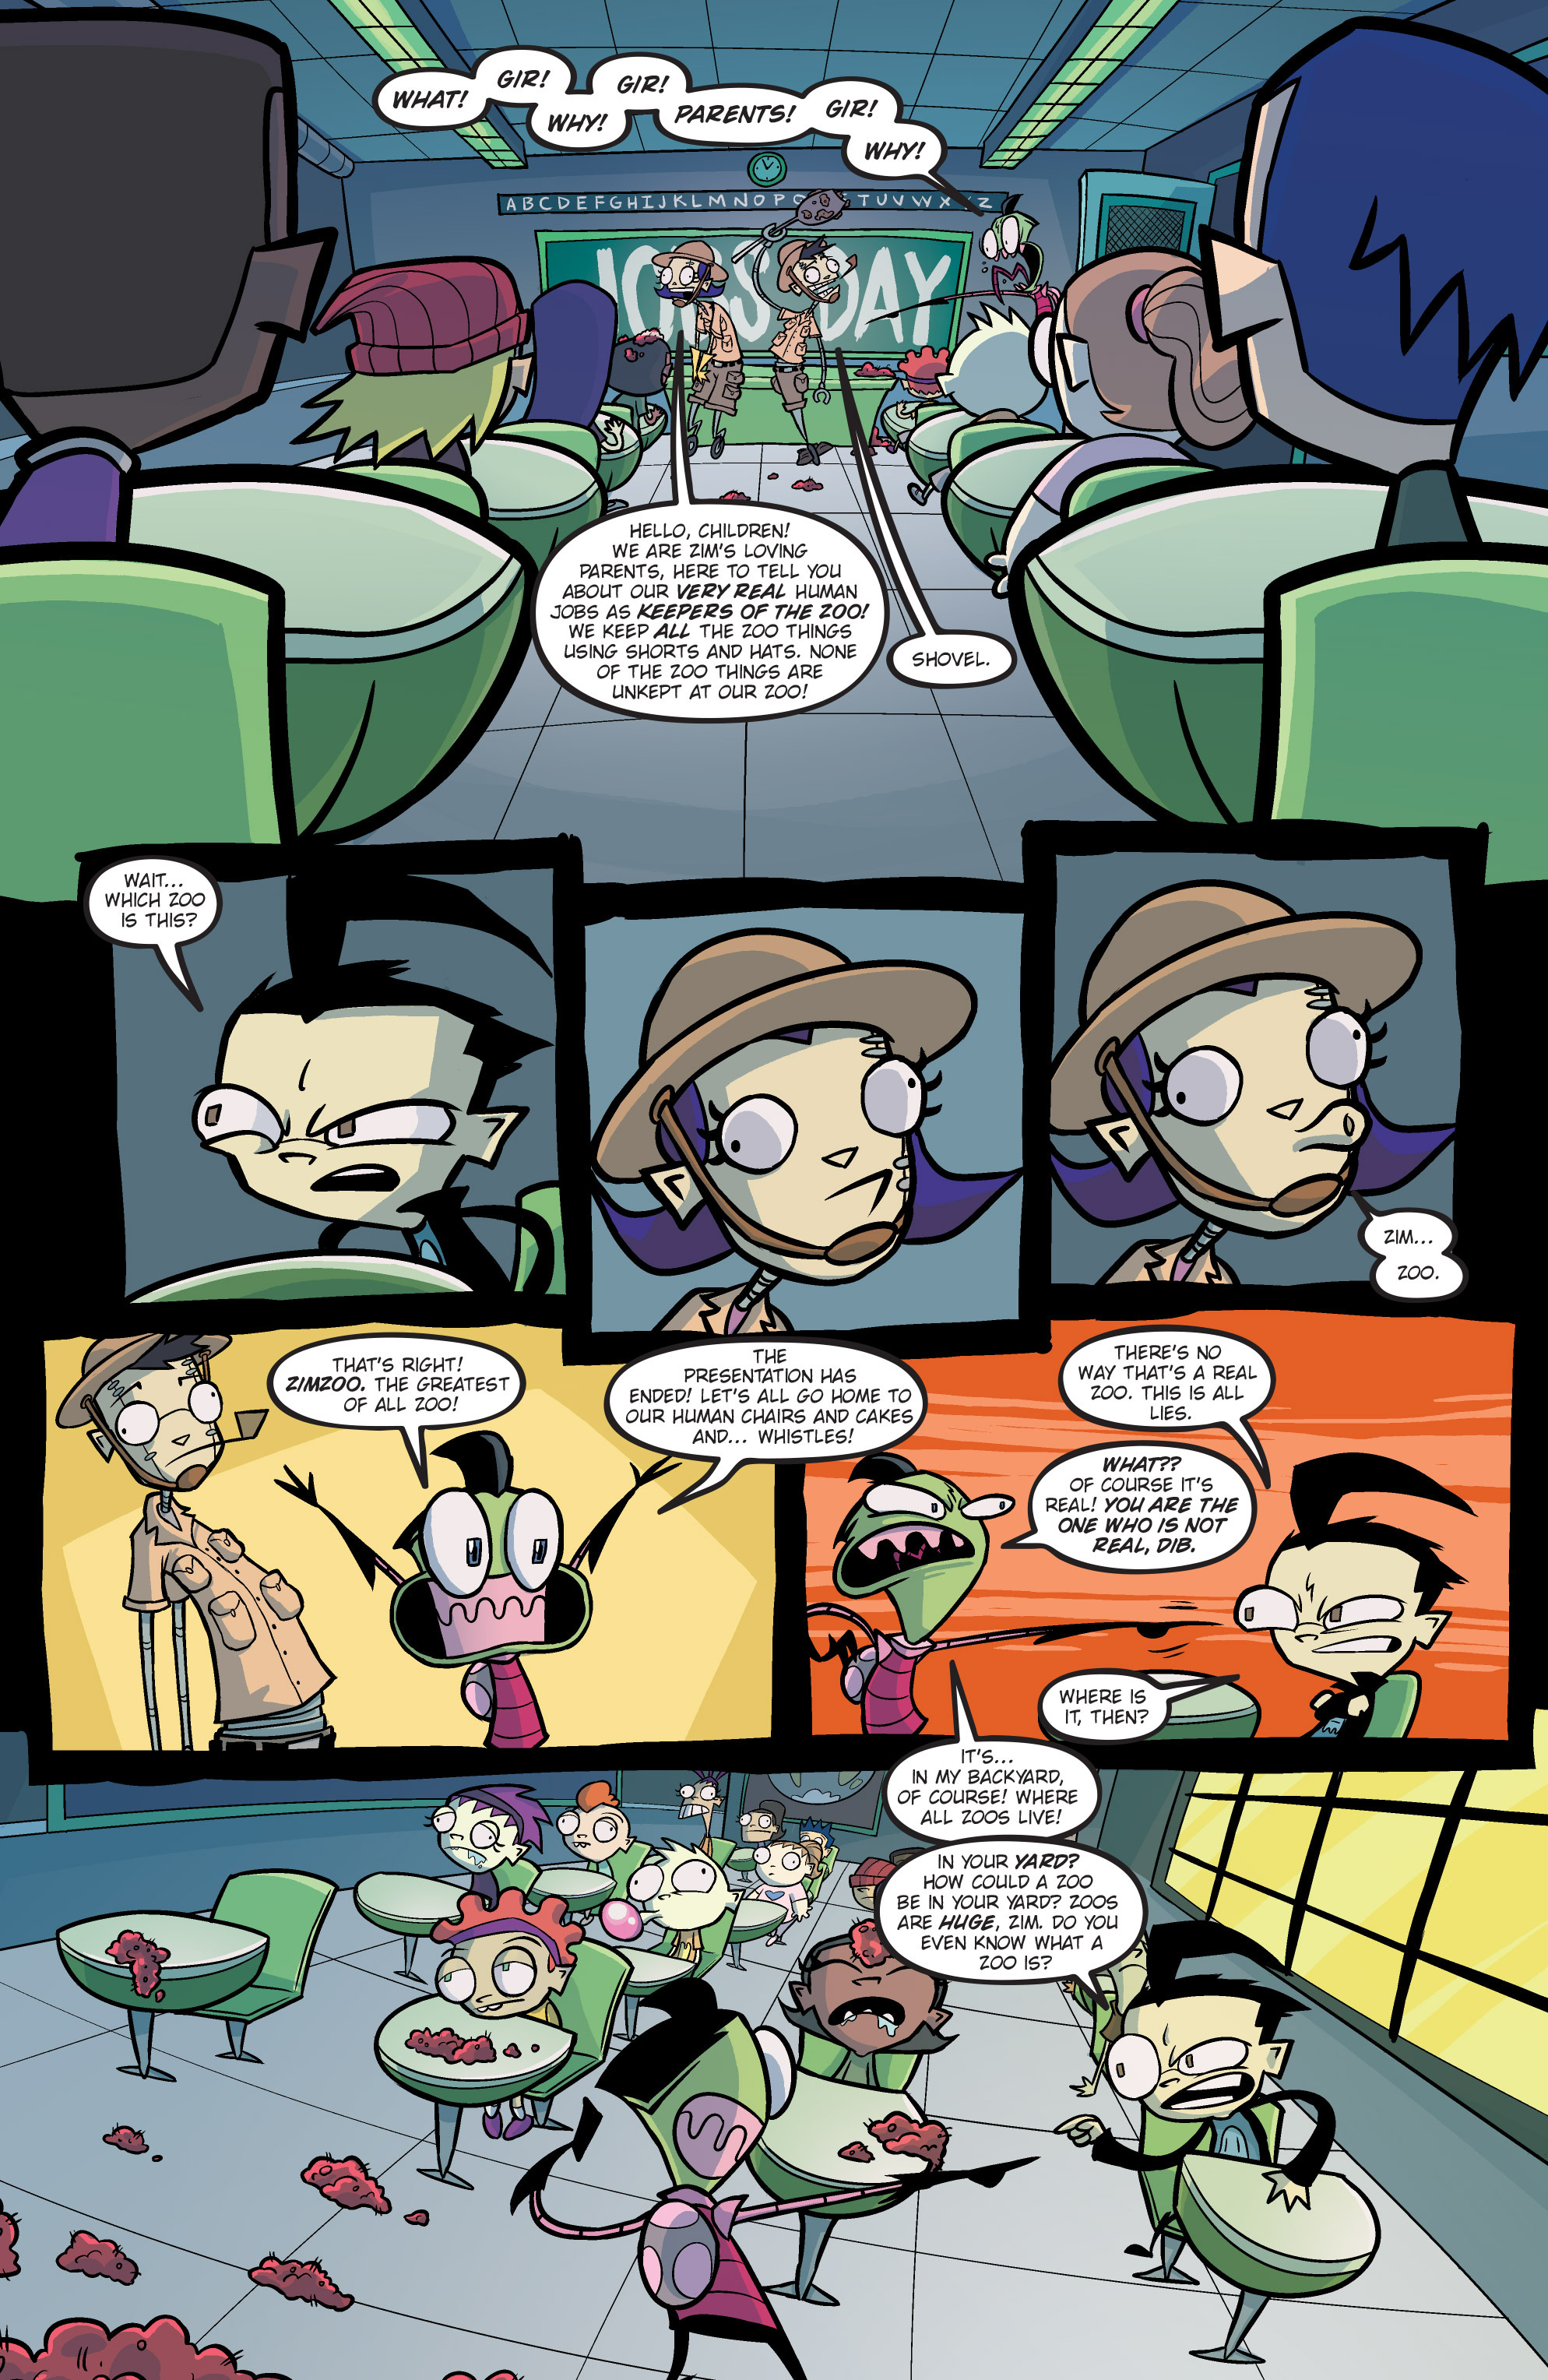 Invader Zim (2015-): Chapter 19 - Page 4